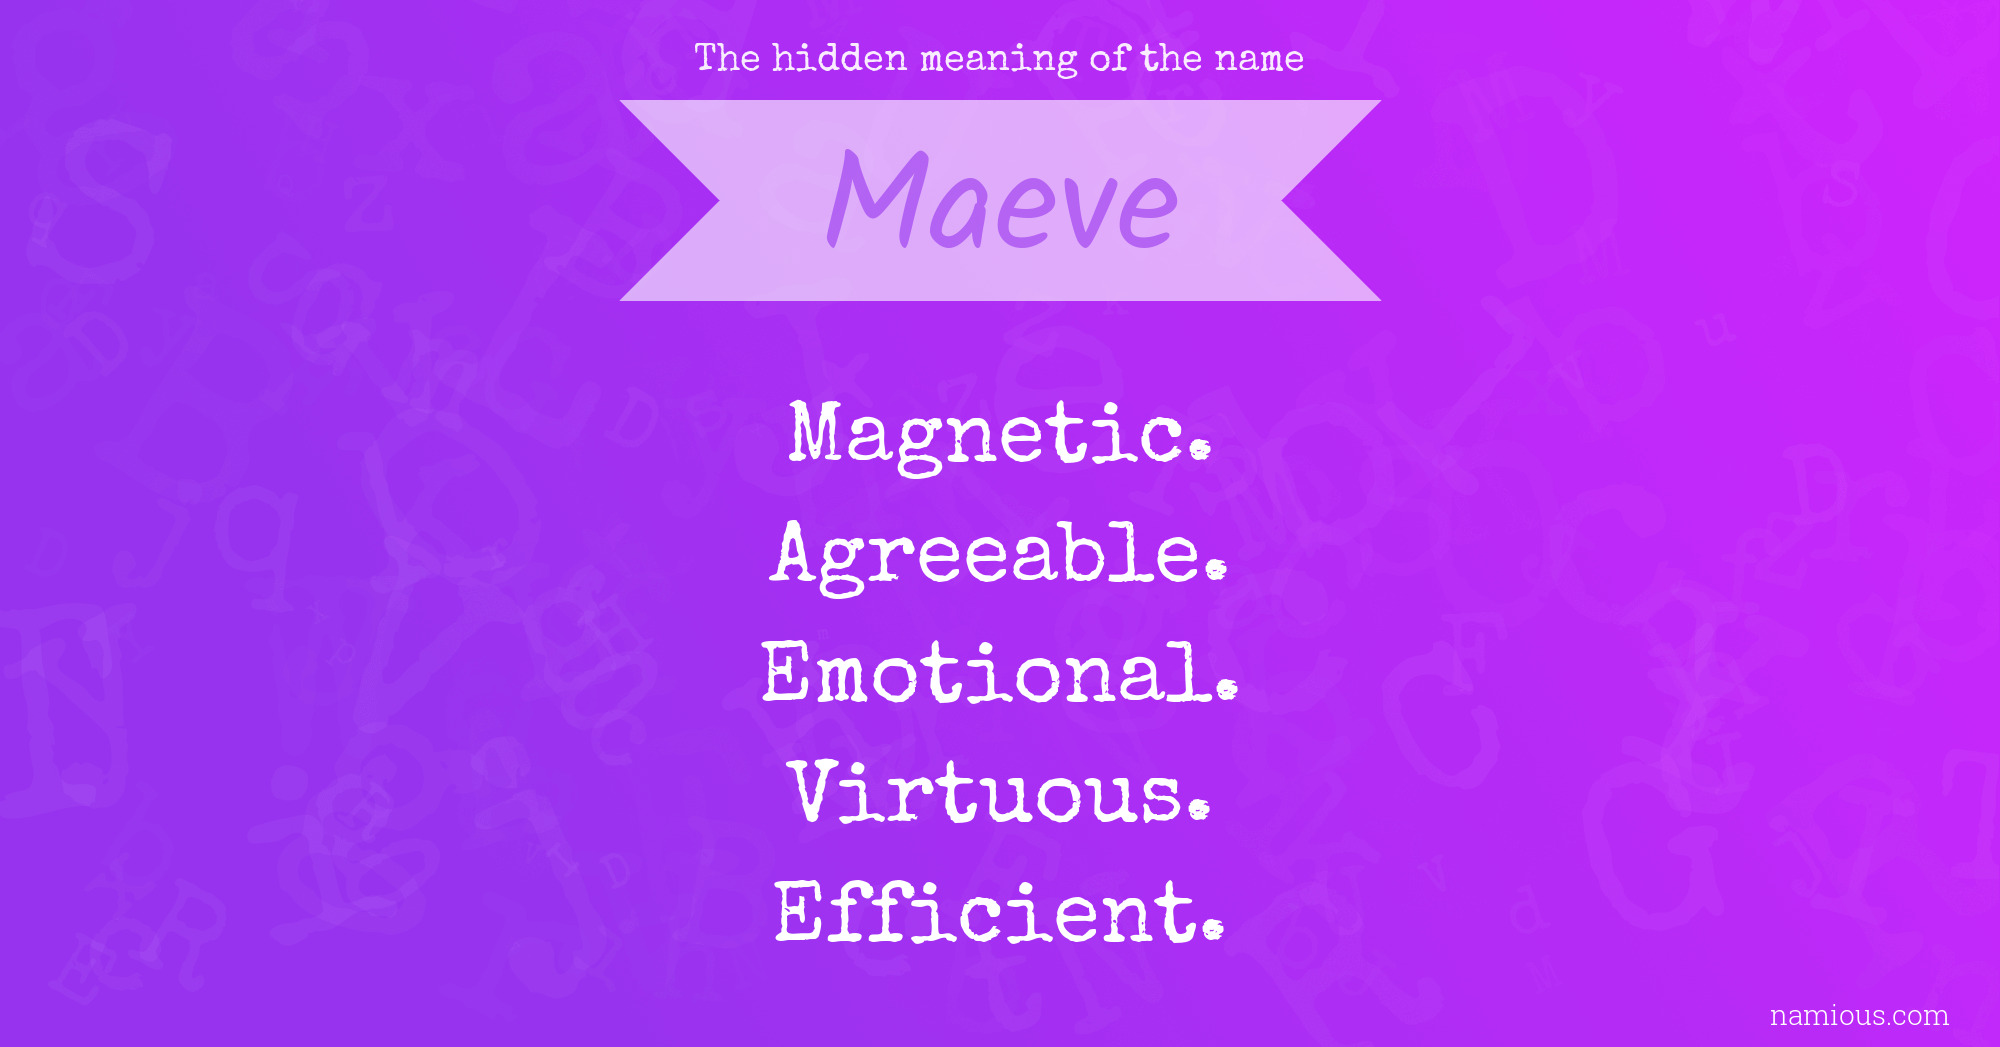 The hidden meaning of the name Maeve